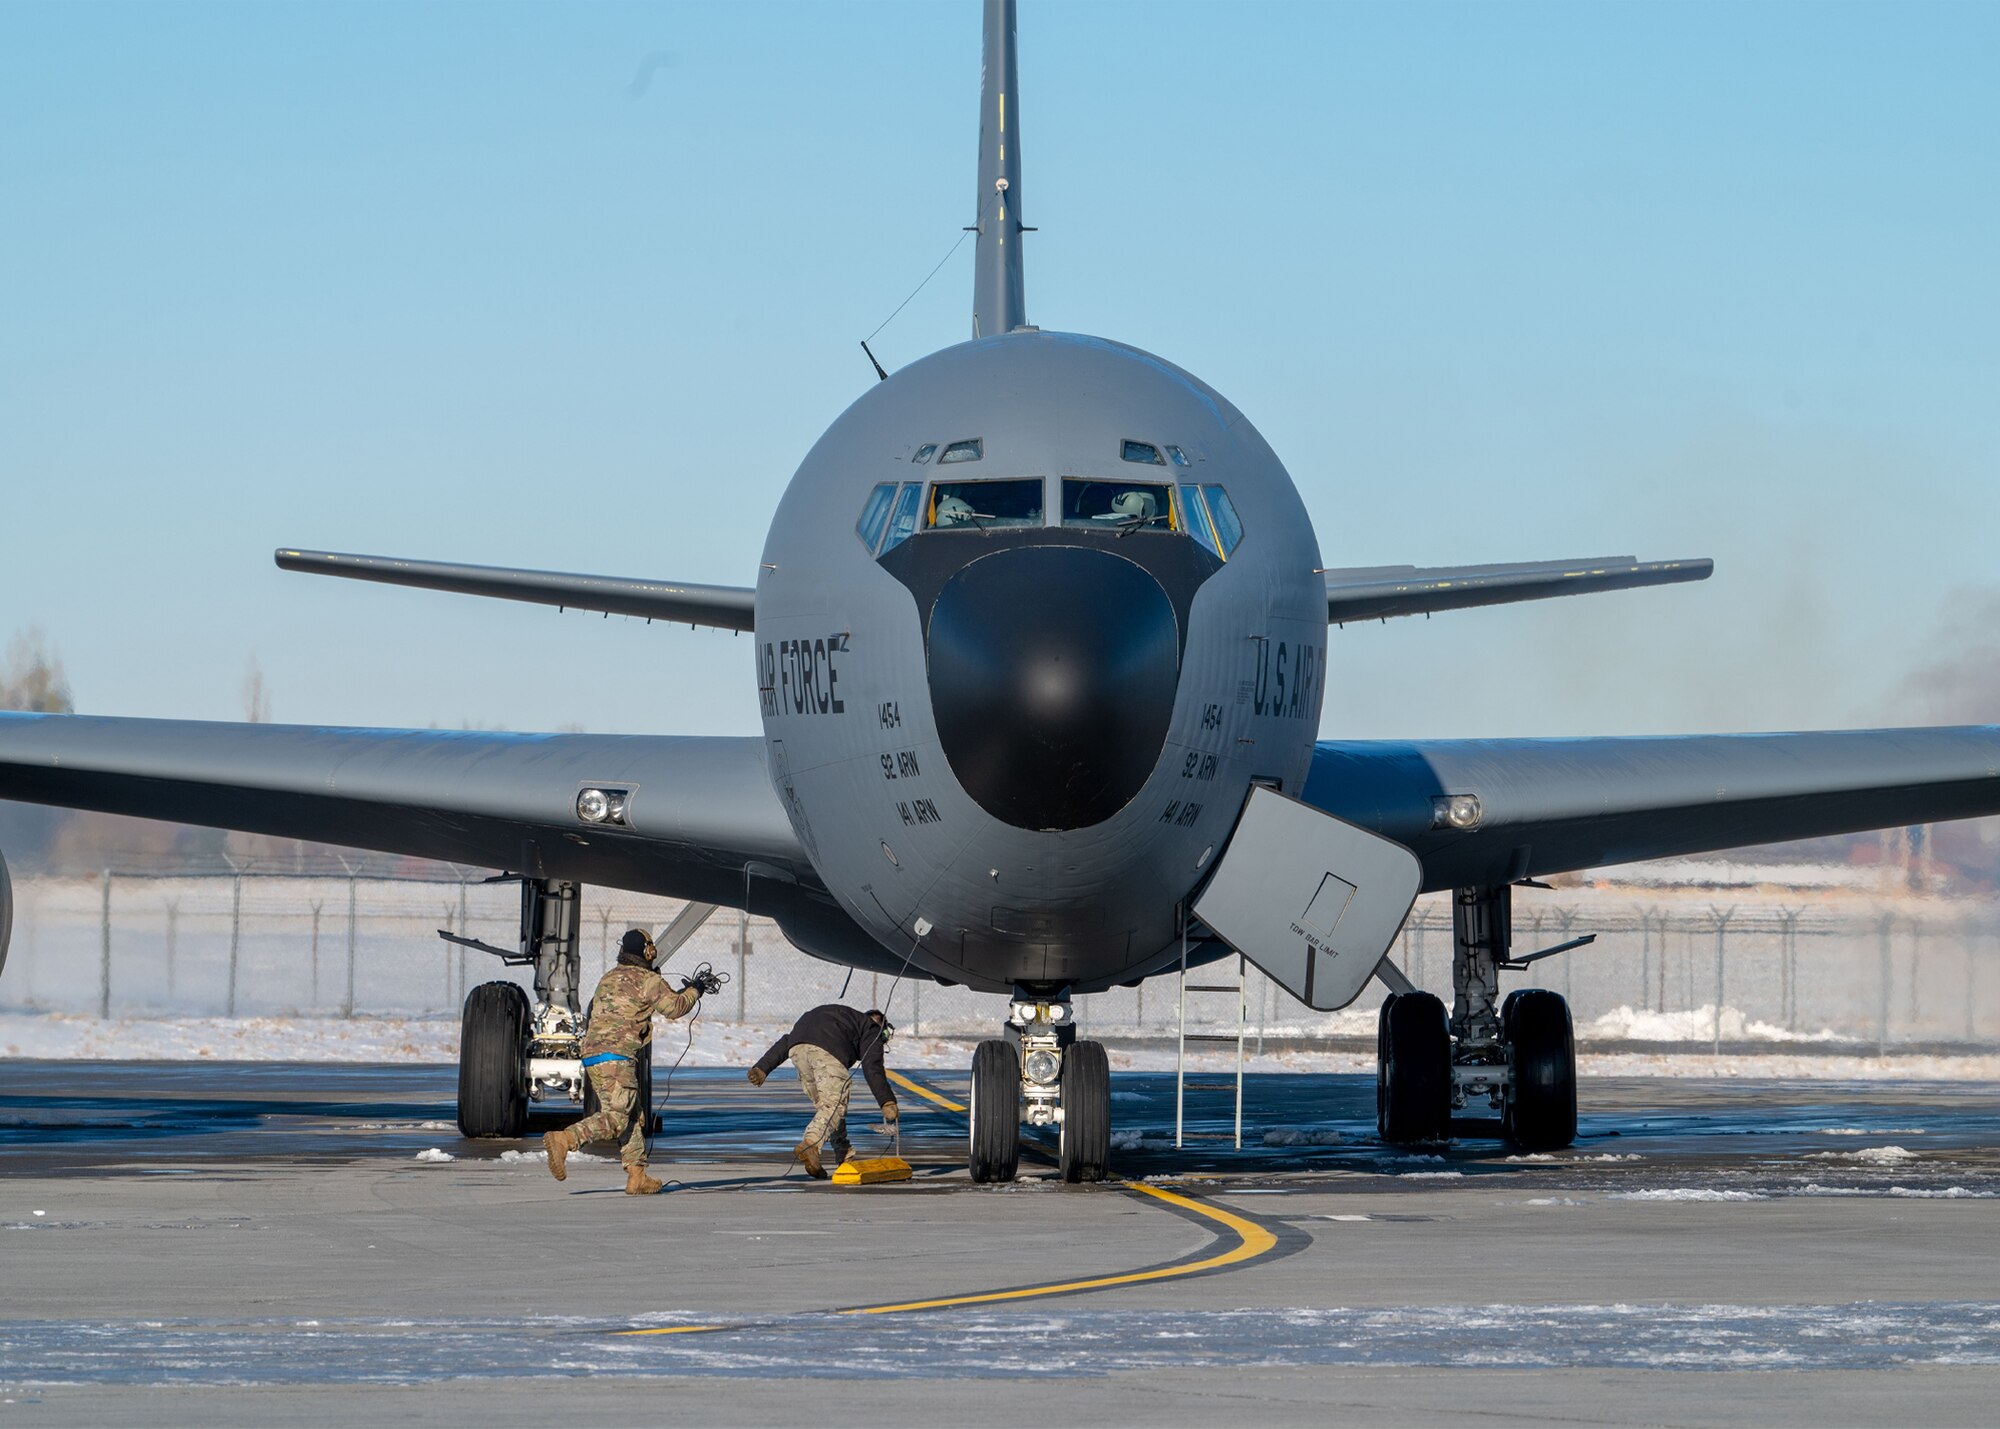 Crews from the 92nd Air Refueling Wing prepare a KC-135 Stratotanker for a simulated alert response during Titan Fury 23-1 at Fairchild Air Force Base, Washington, Nov. 9, 2022. during the Titan Fury 23-1 exercise. Readiness exercises at this scale enable U.S. strategic capabilities used every day to deter attacks.  (U.S. Air Force photo by Airman 1st Class Stassney Davis)